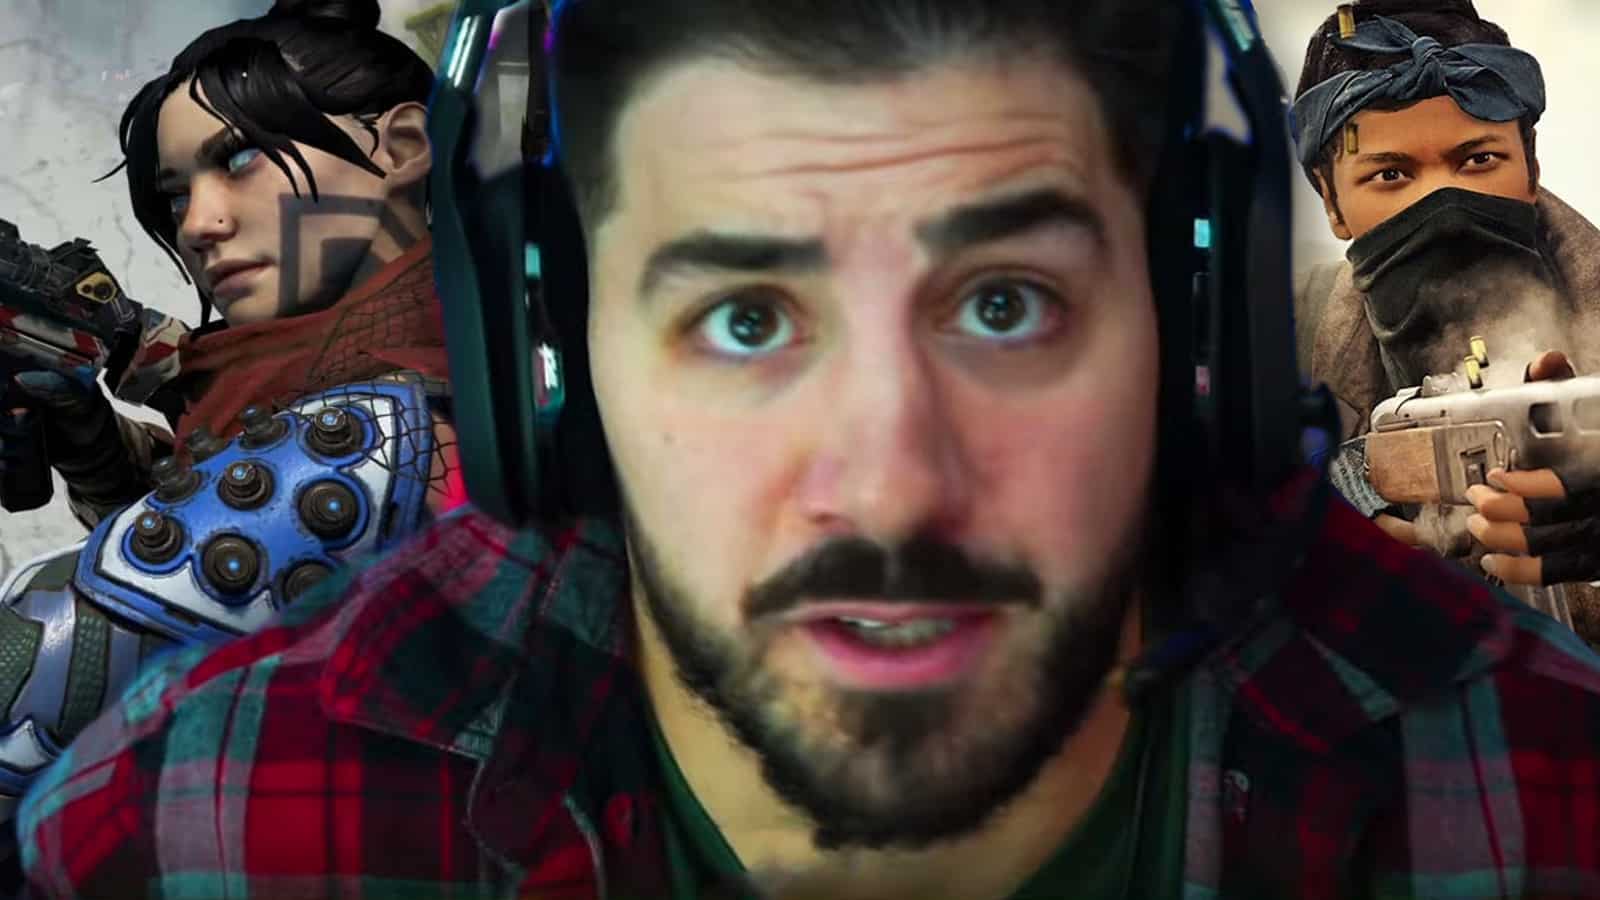 Nickmercs next to Wraith from Apex Legends and Warzone operator.